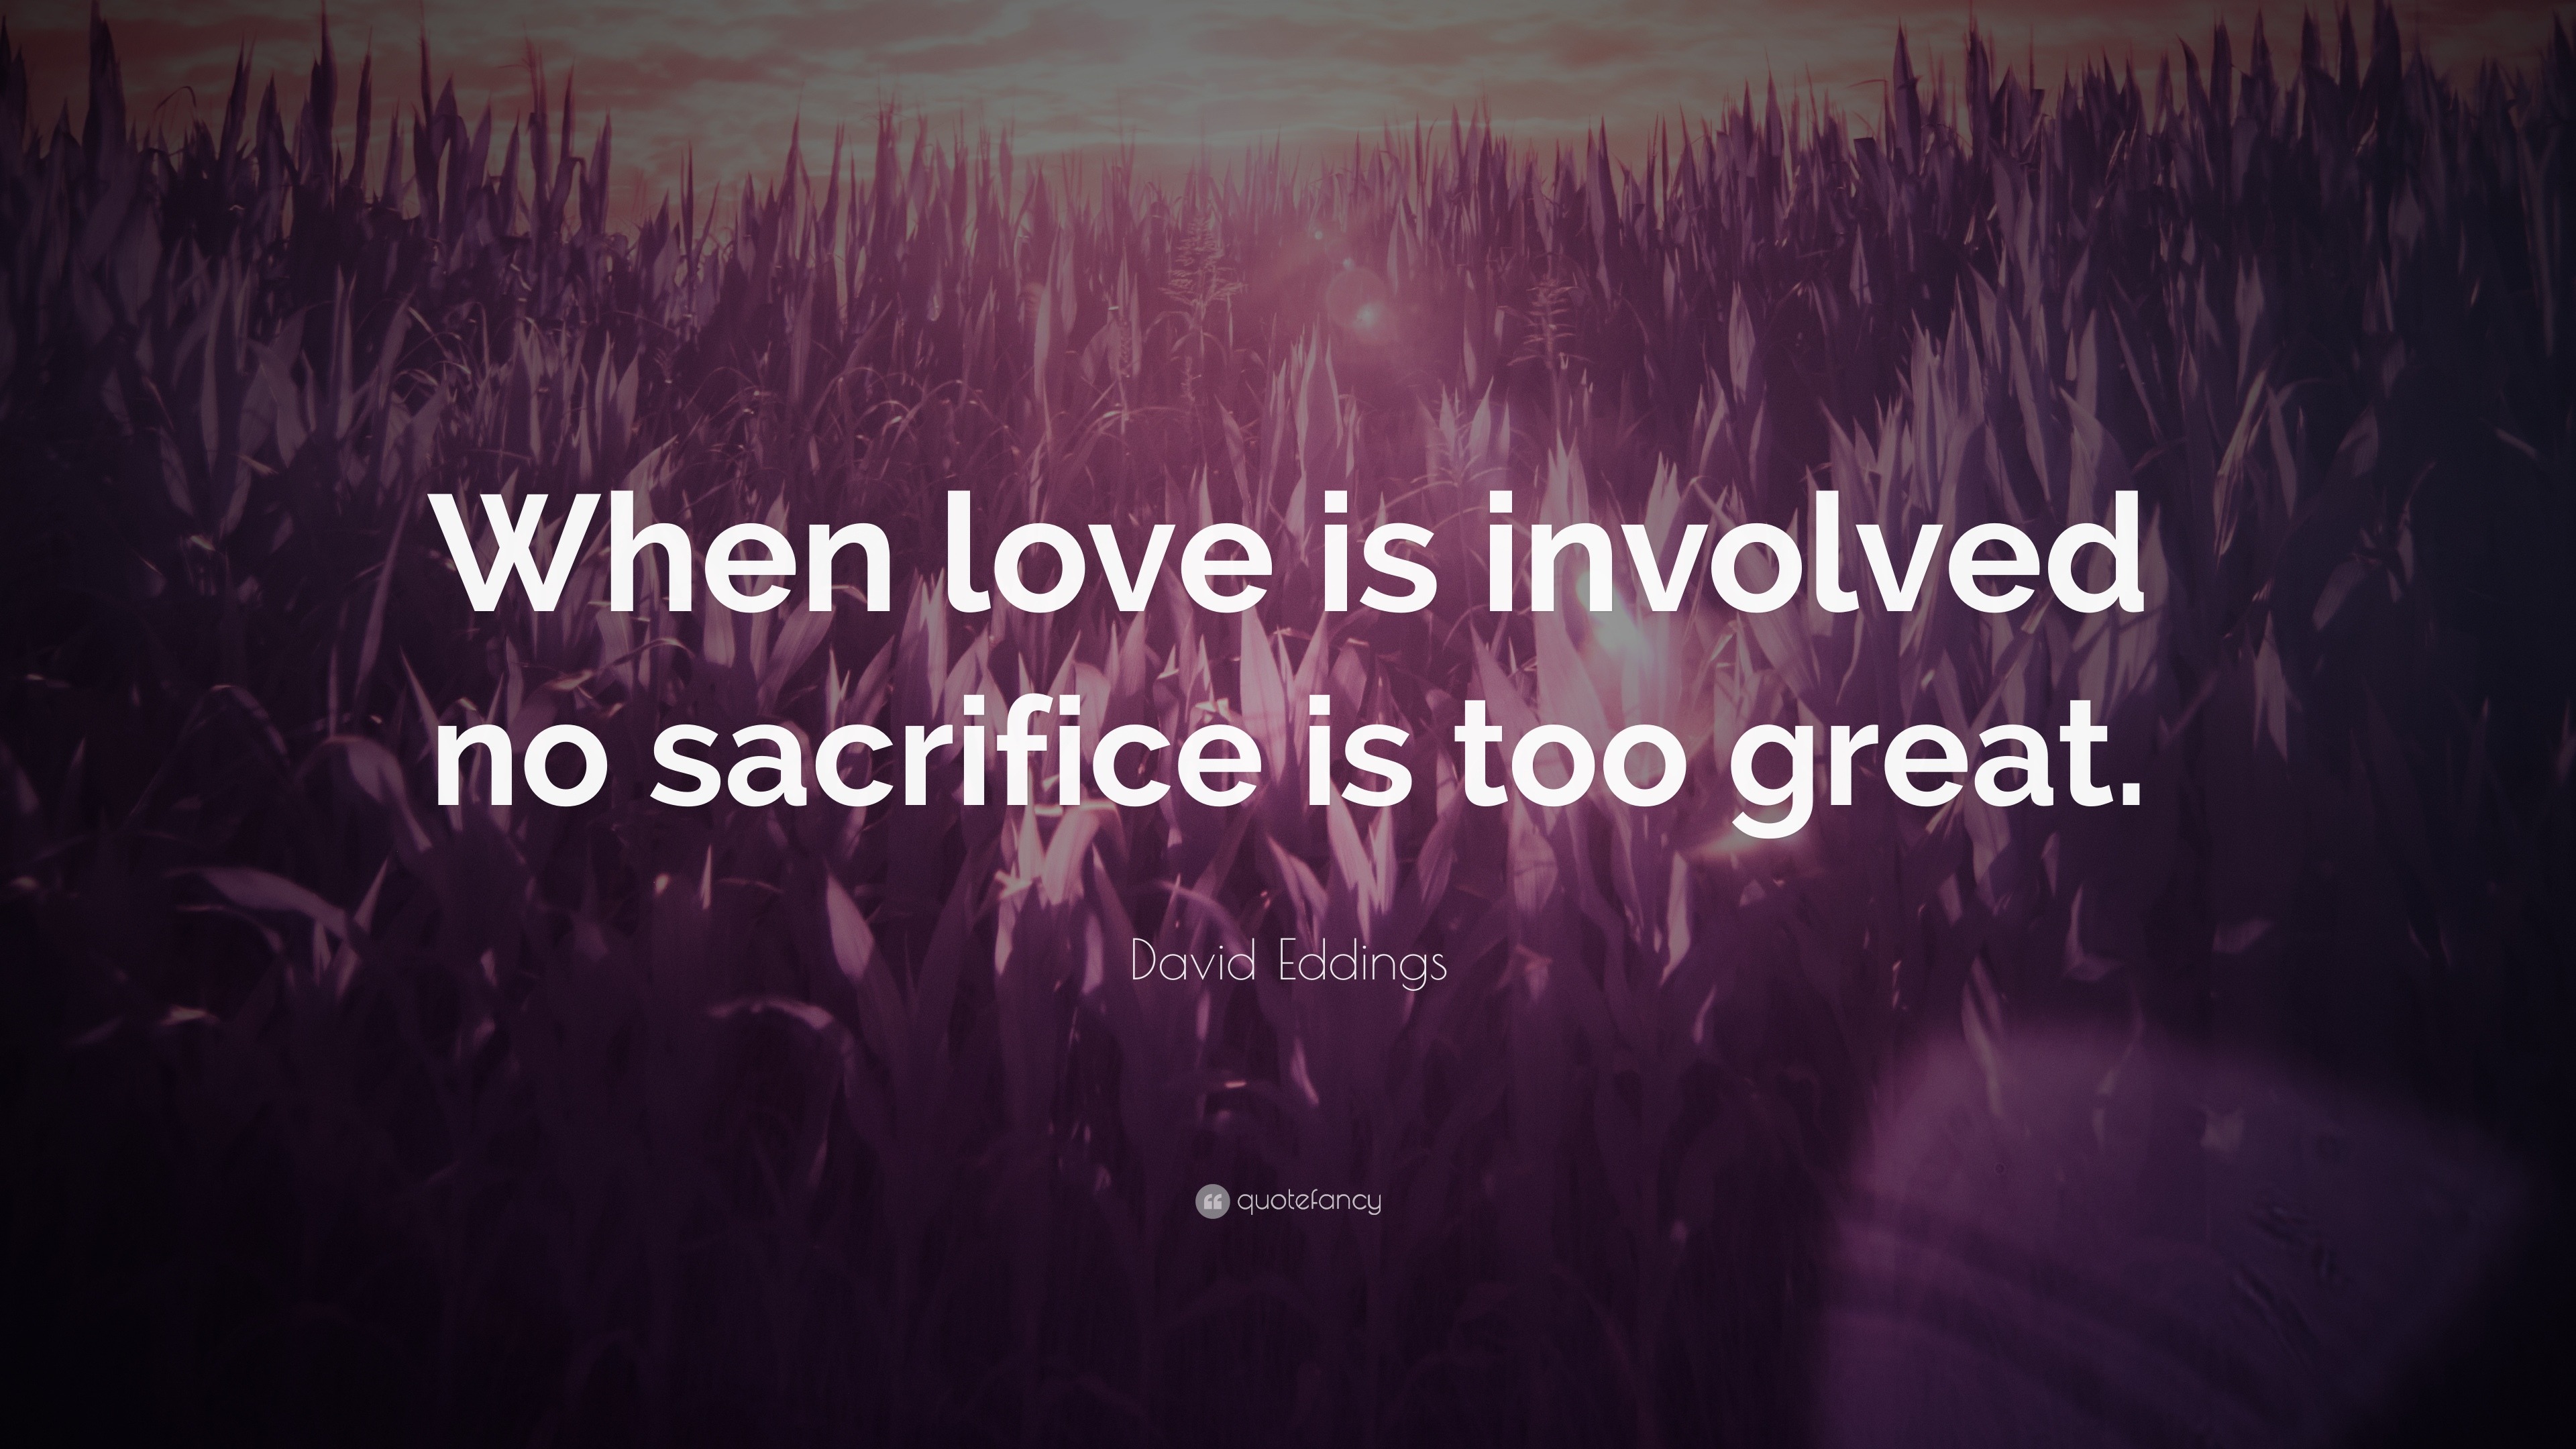 Thesis about love and sacrifice   lovecharley.com